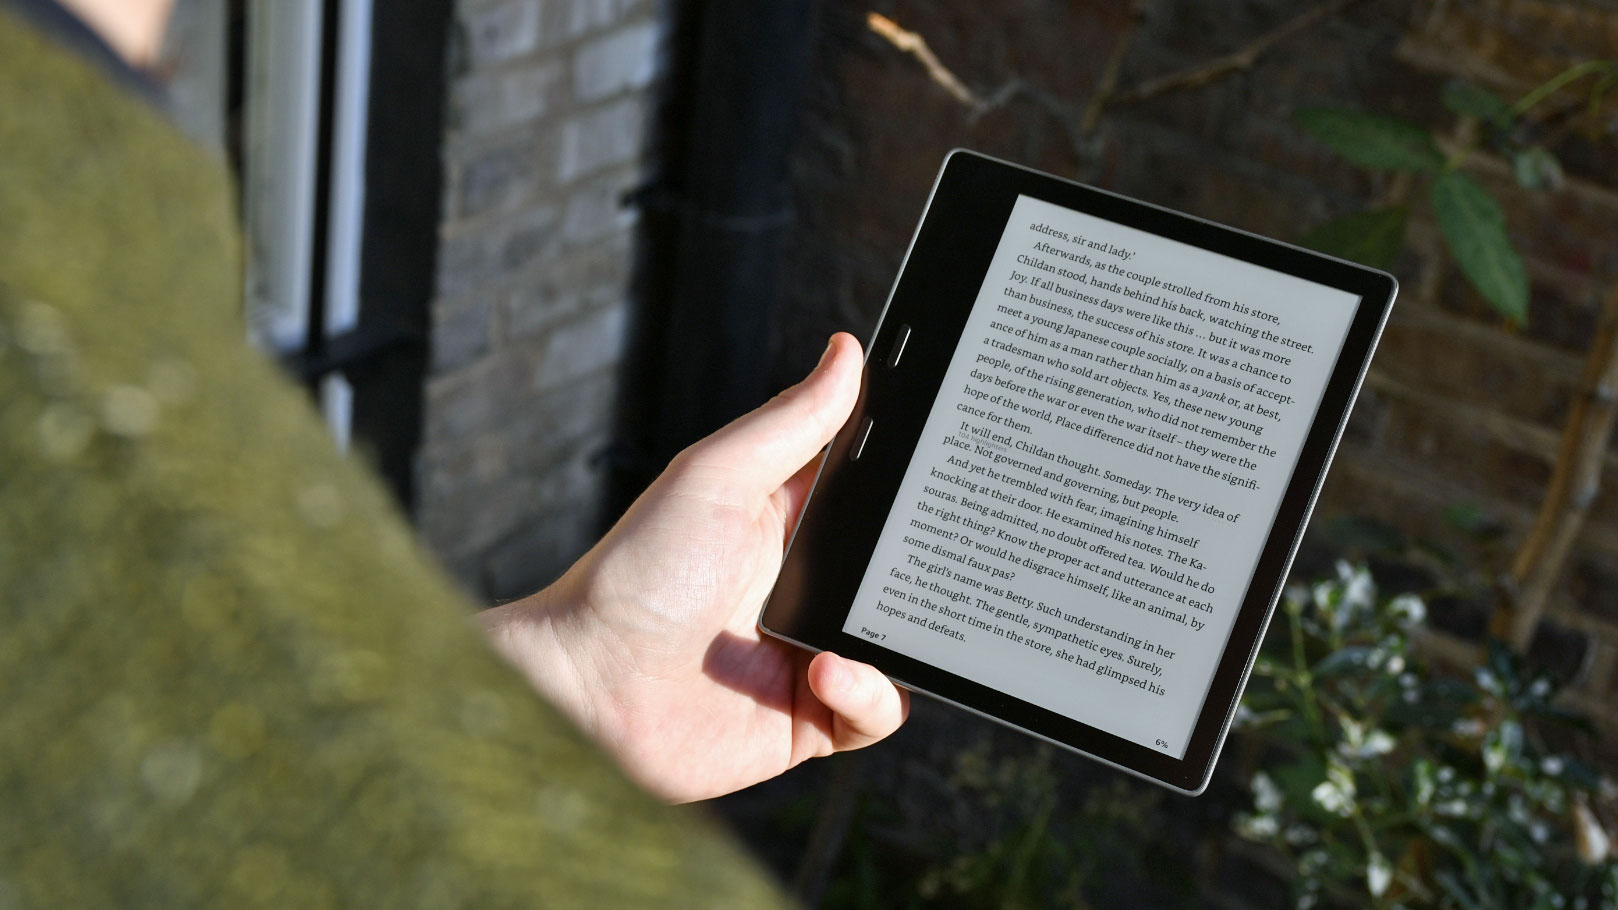 makes its latest splash with waterproof Kindle Oasis e-reader